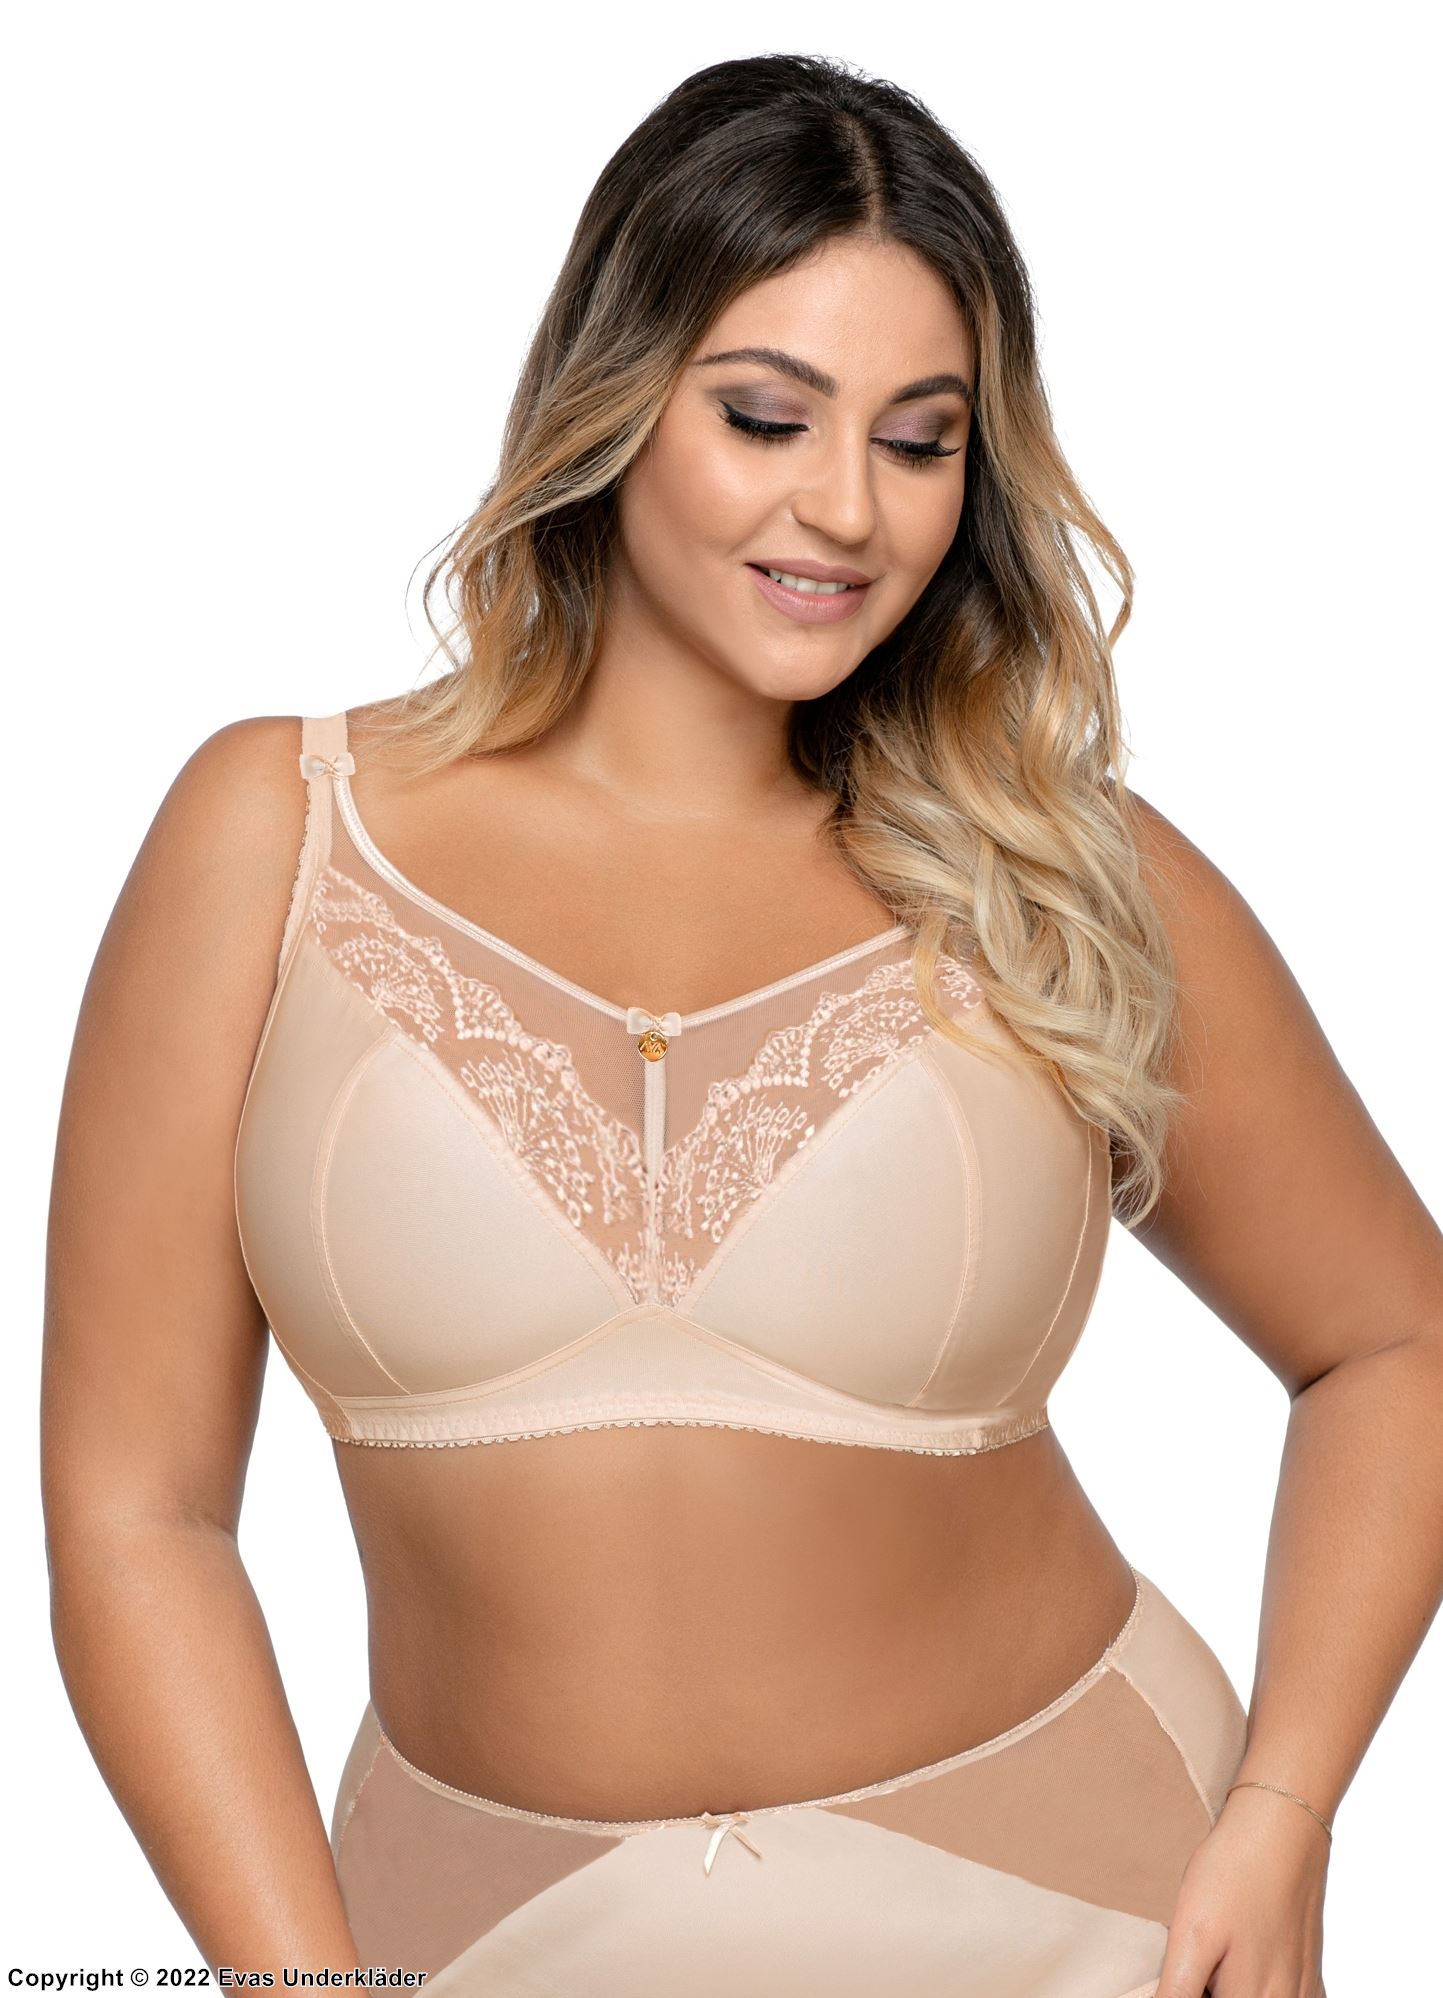 Soft bra, sheer mesh and lace, wide shoulder straps, B to K-cup